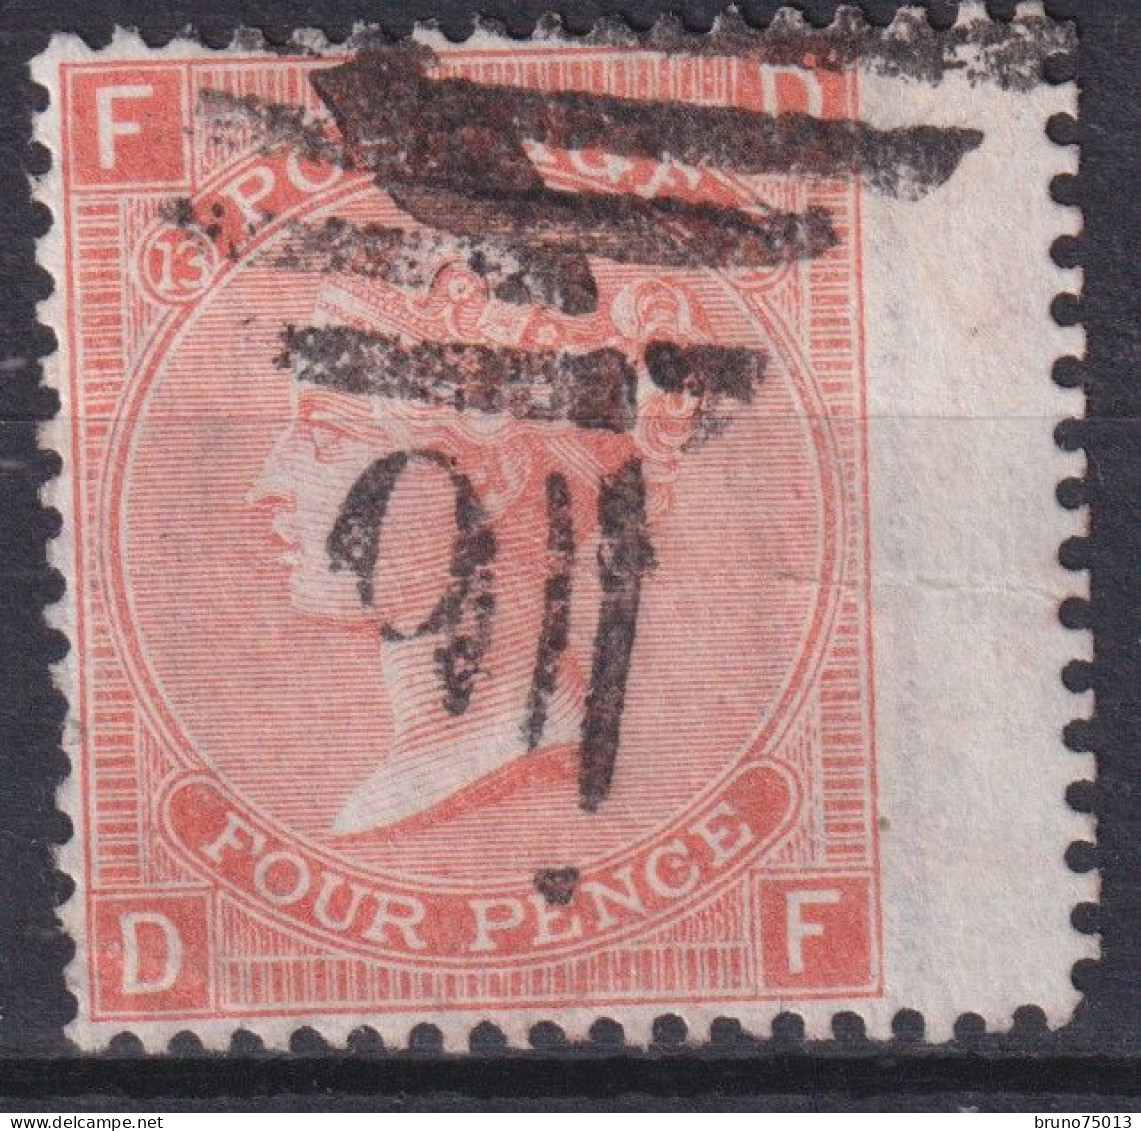 YT 32 Pl 13 - Used Stamps